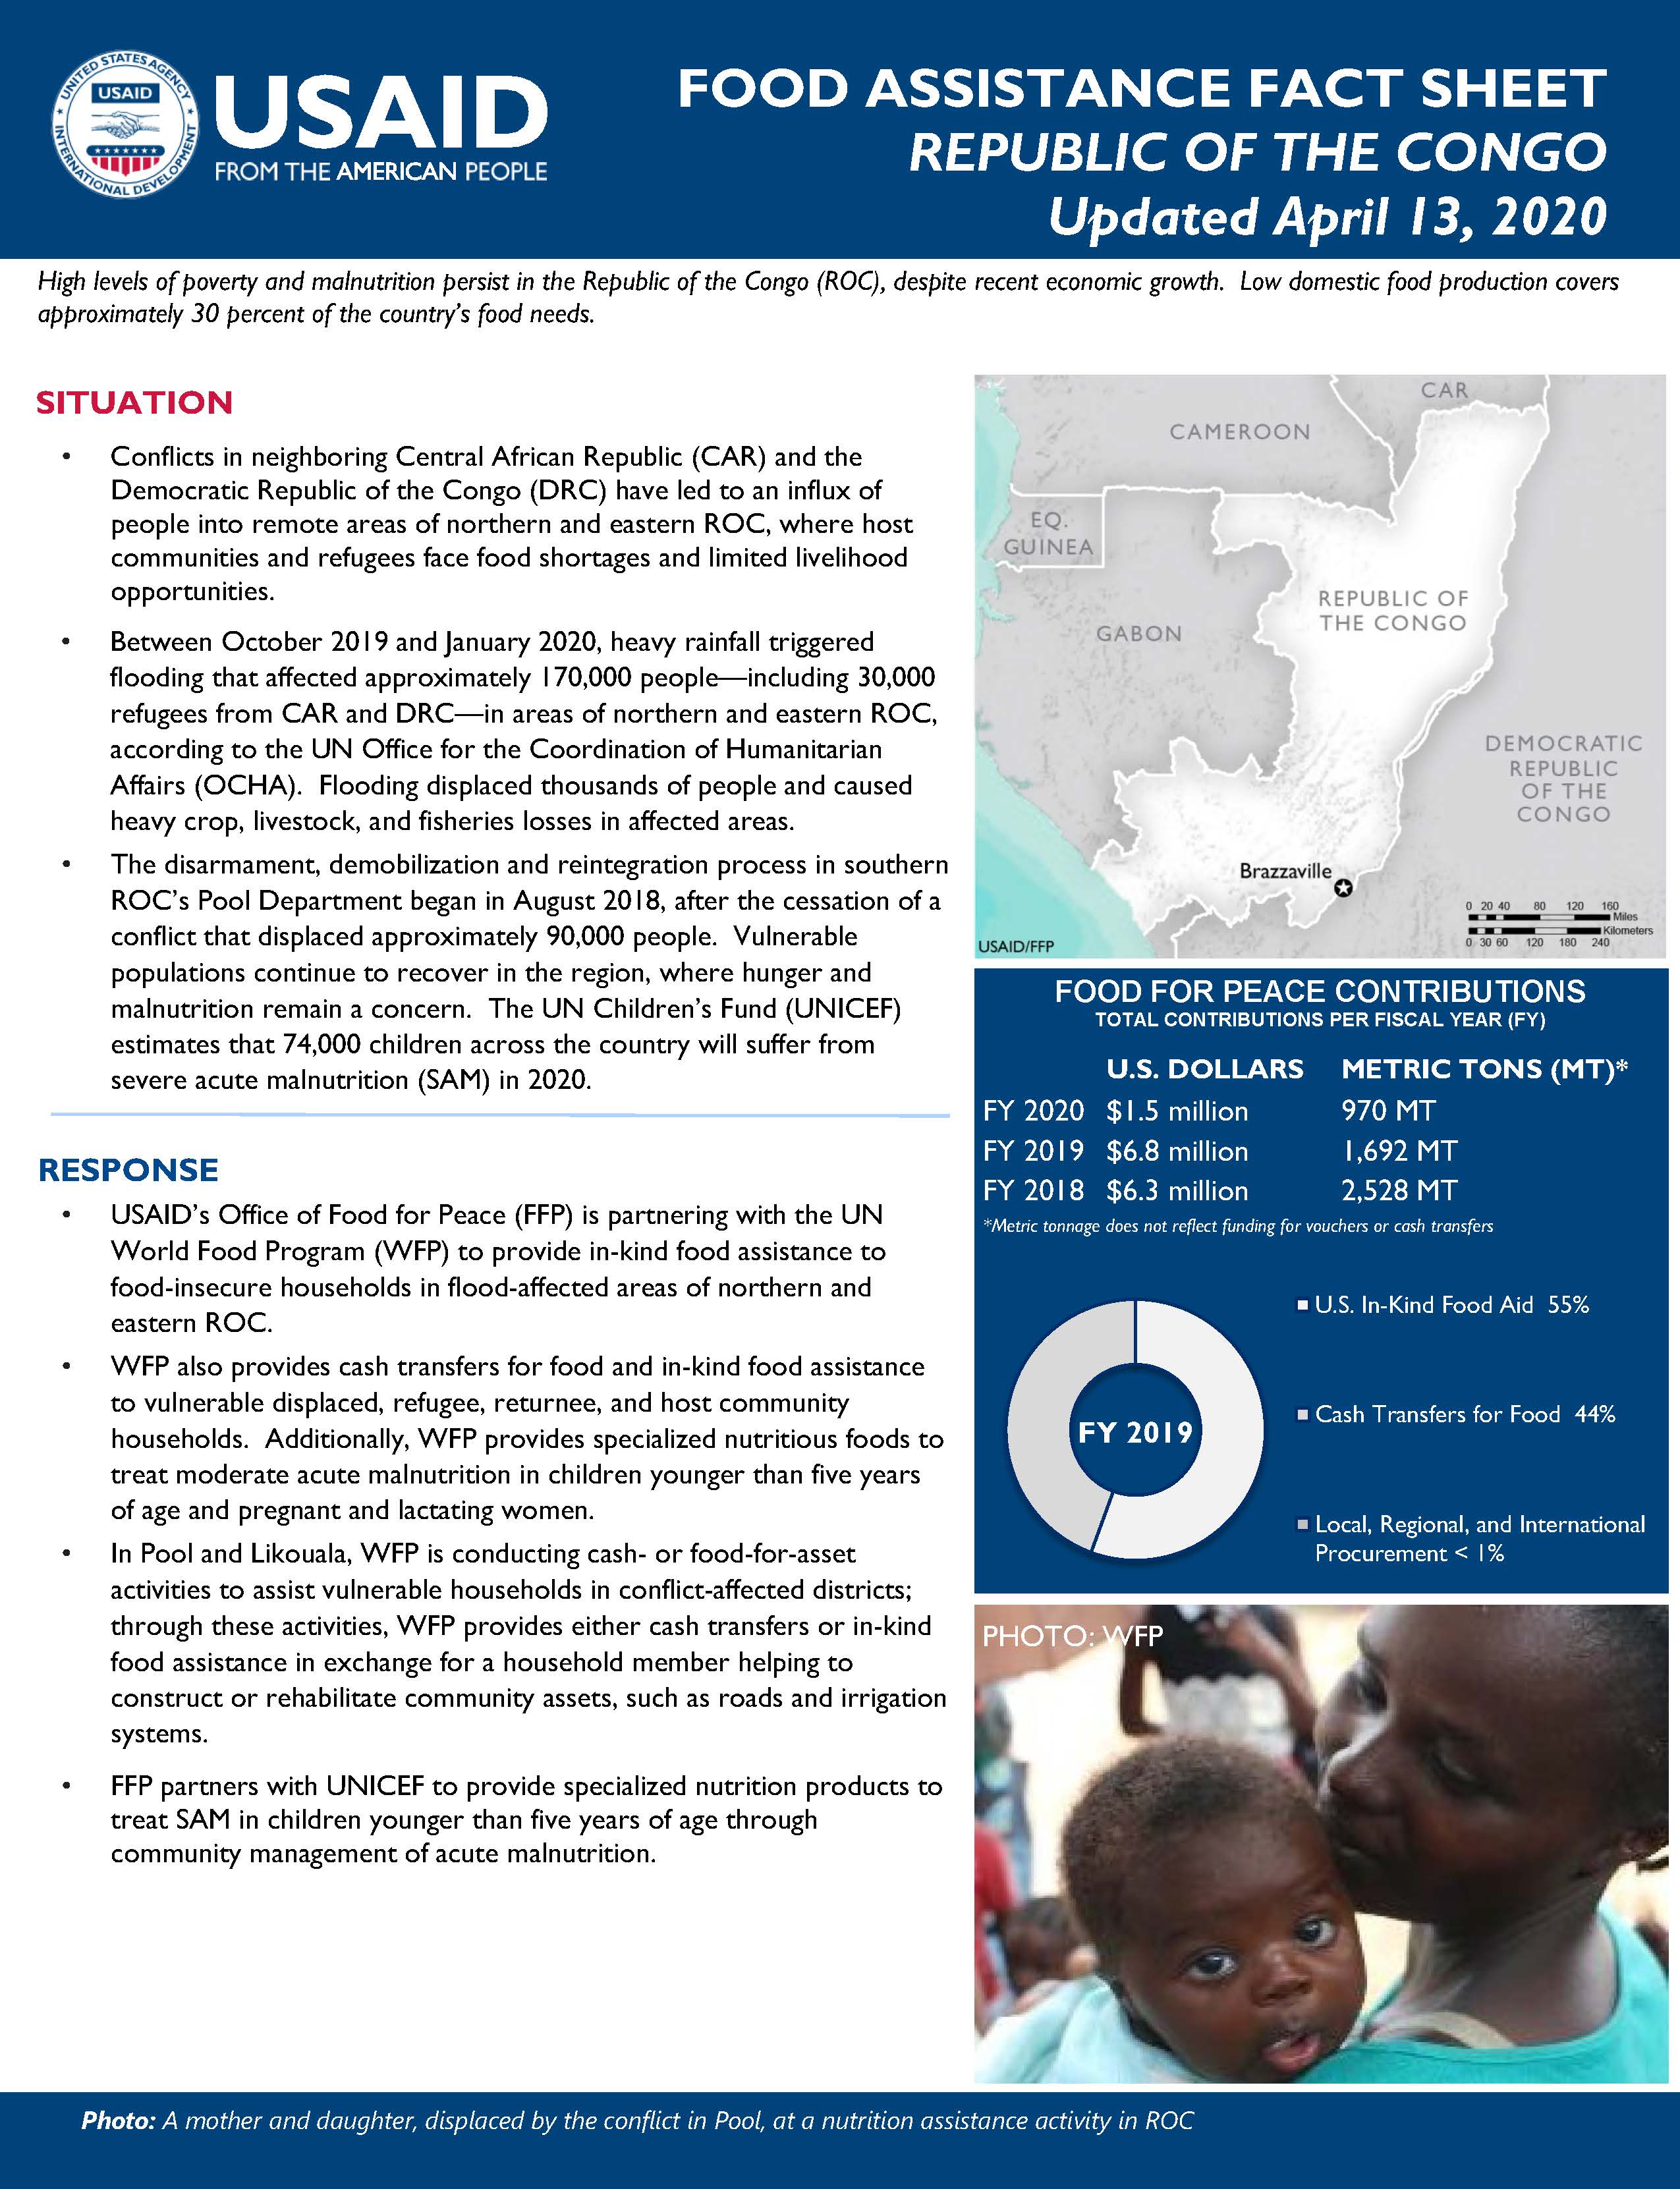 Food Assistance Fact Sheet - Republic of the Congo